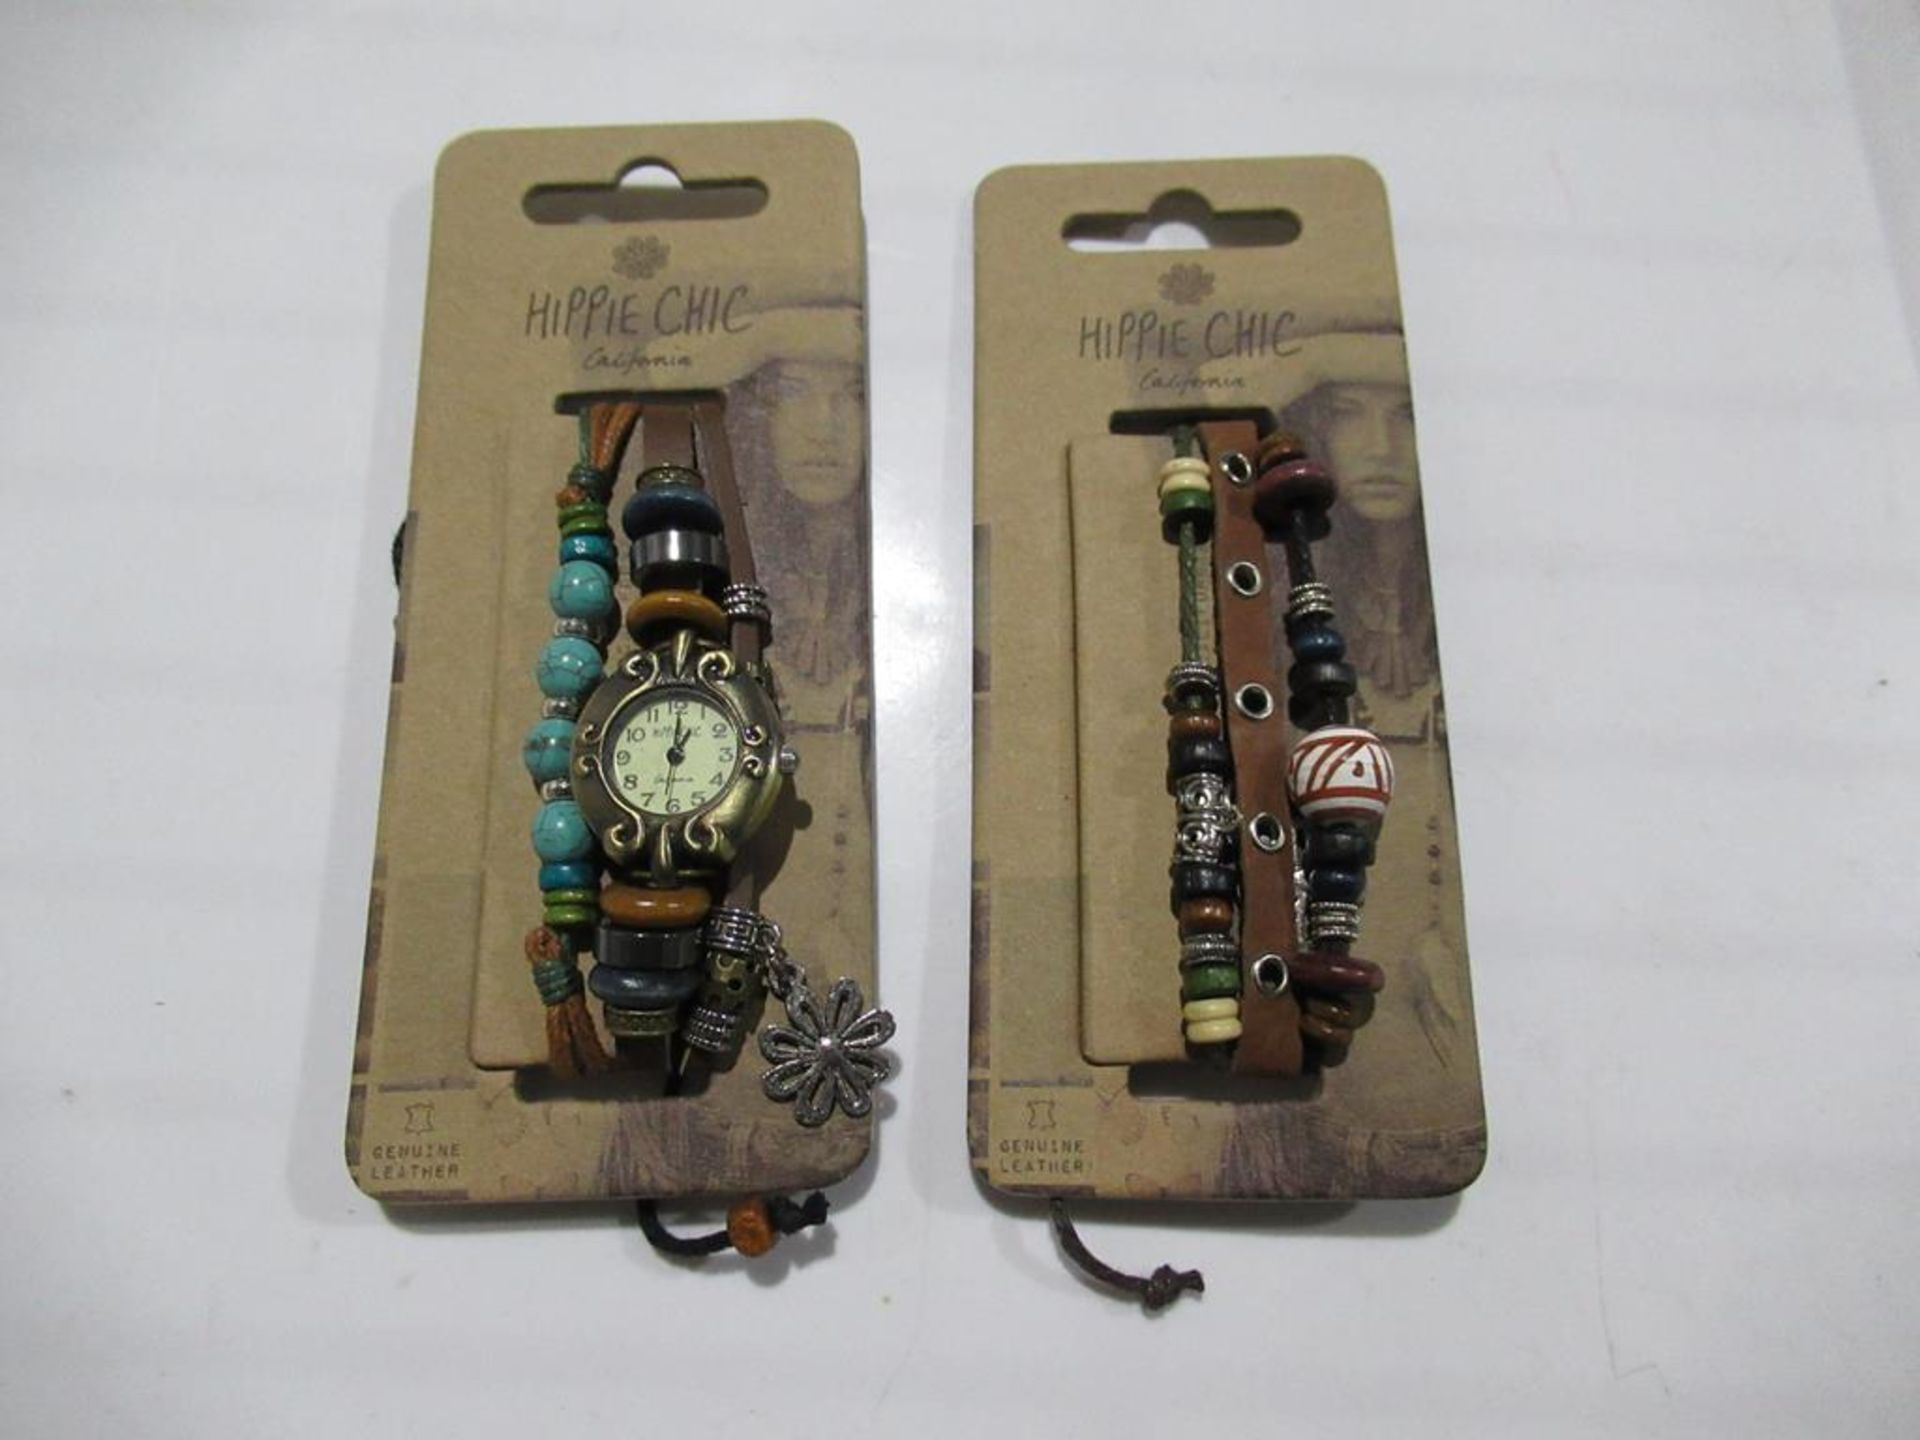 A box of Hippie Chic 'Bazaar' watches - Image 2 of 3